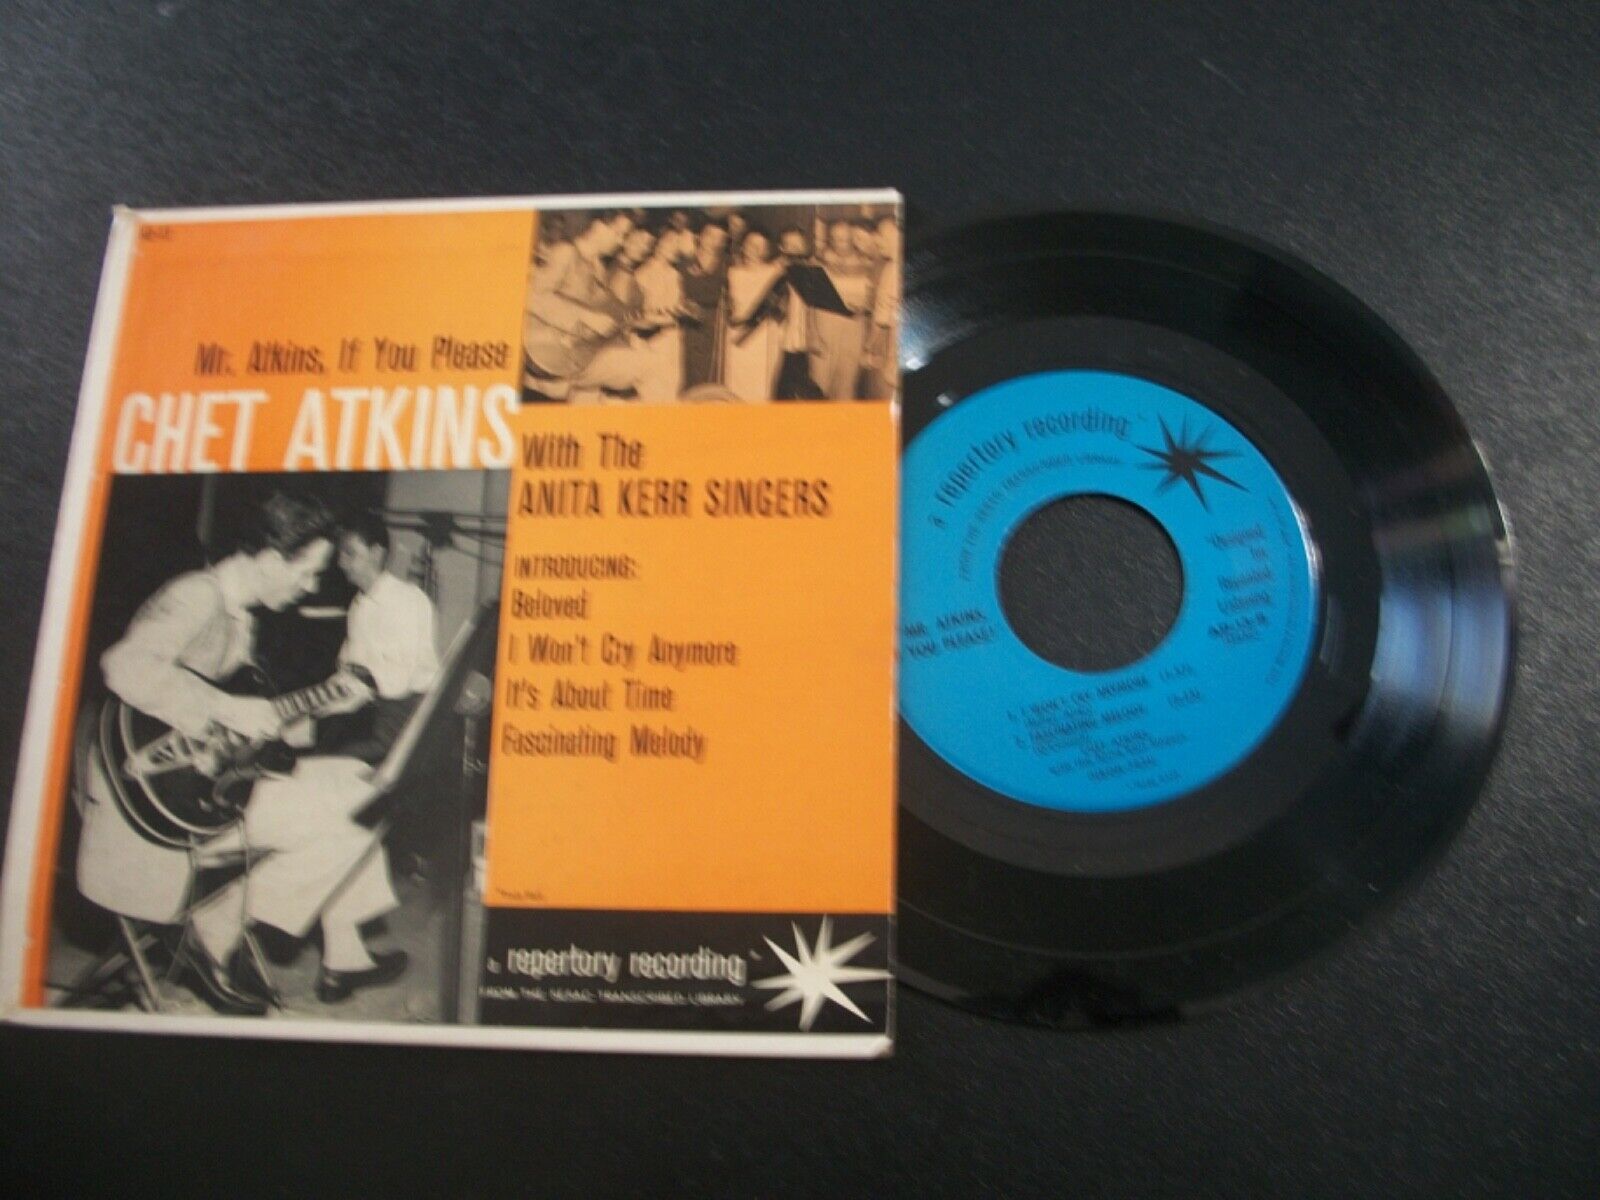 Chet Atkins EP-Mr. Atkins If You Please-1957-Repertory-EX+